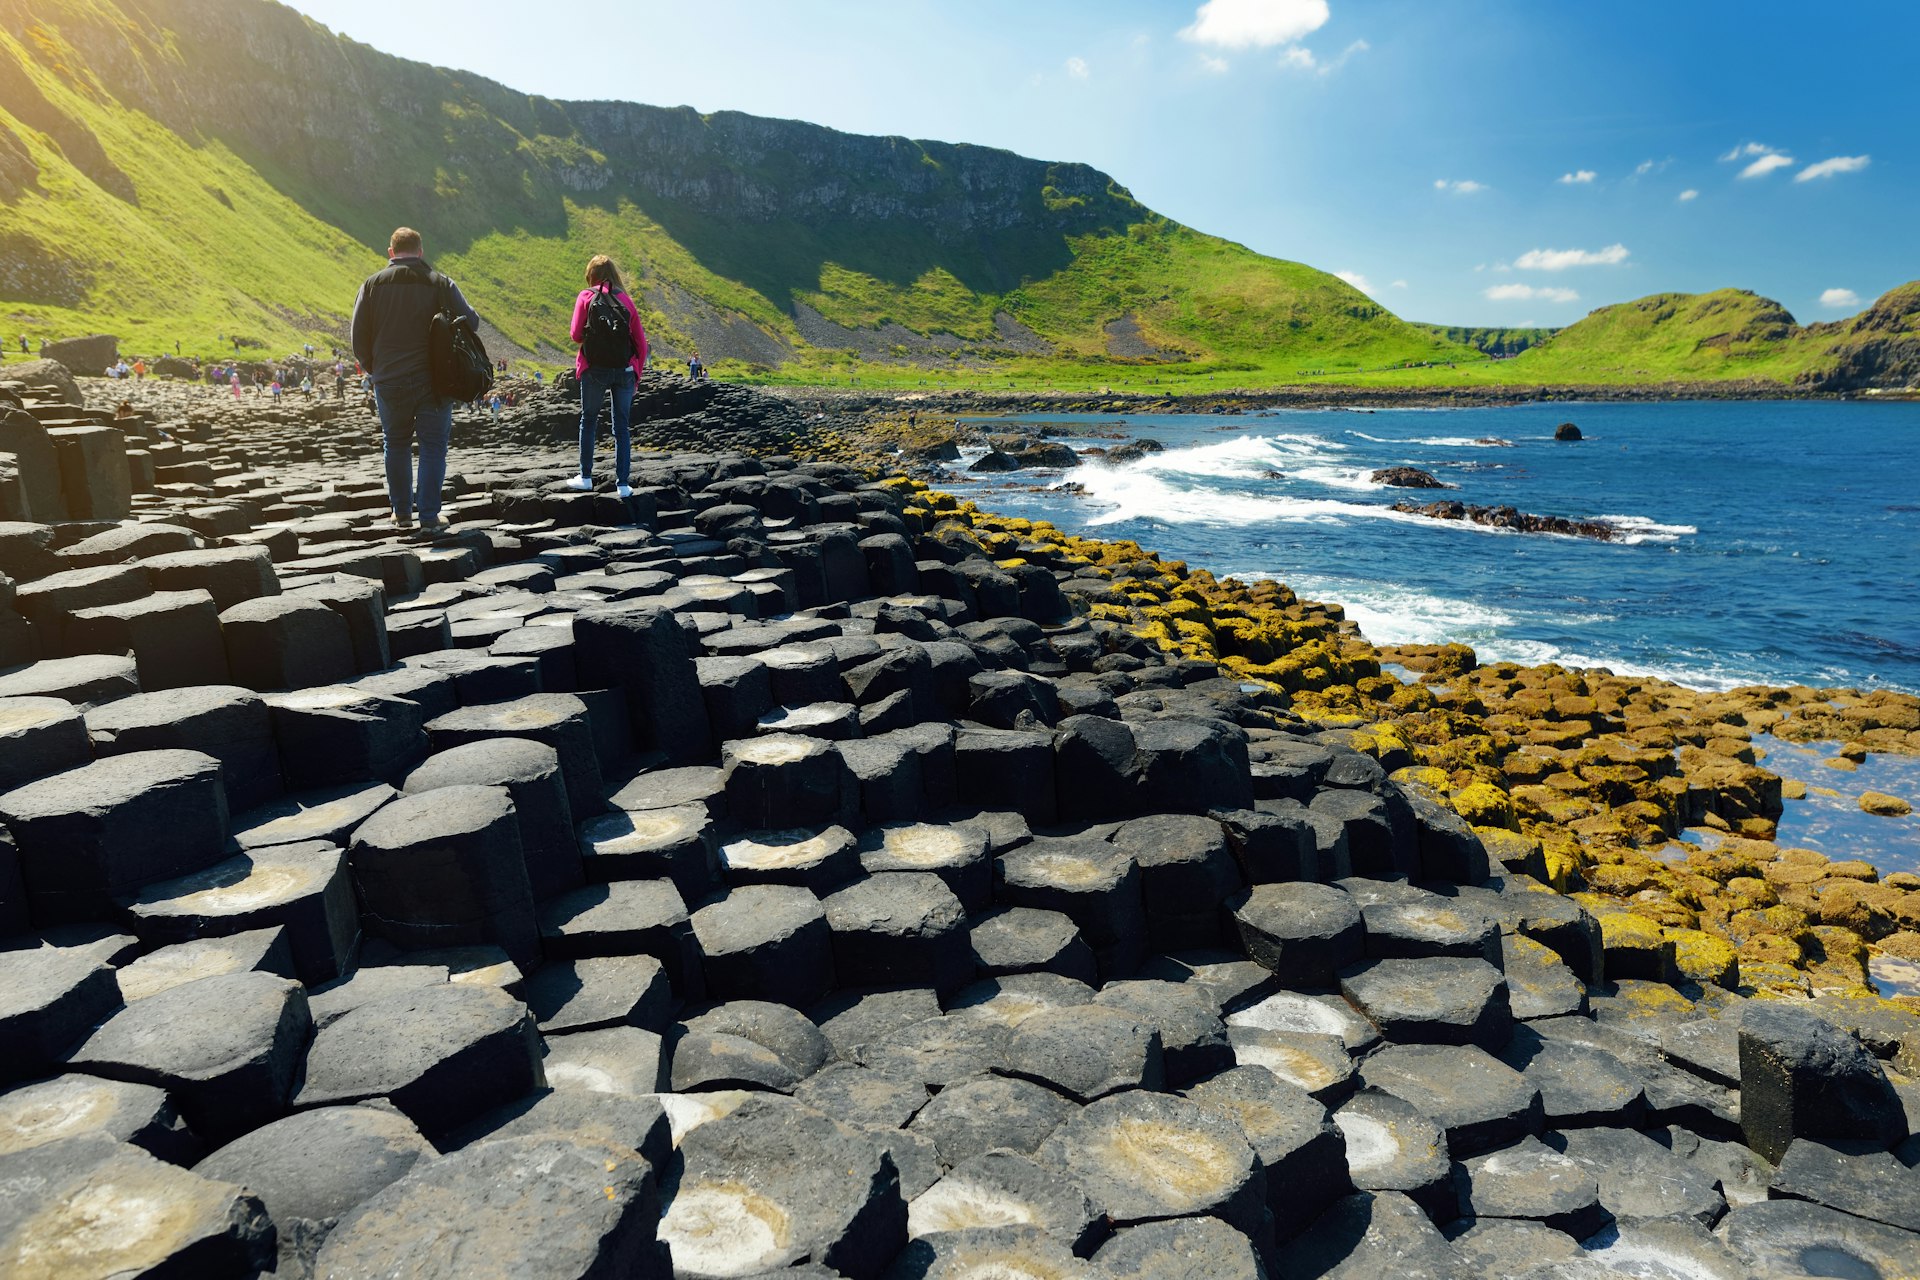 Tourists walking at Giants Causeway, an area of hexagonal basalt stones, created by ancient volcanic fissure eruption, County Antrim, Northern Ireland.